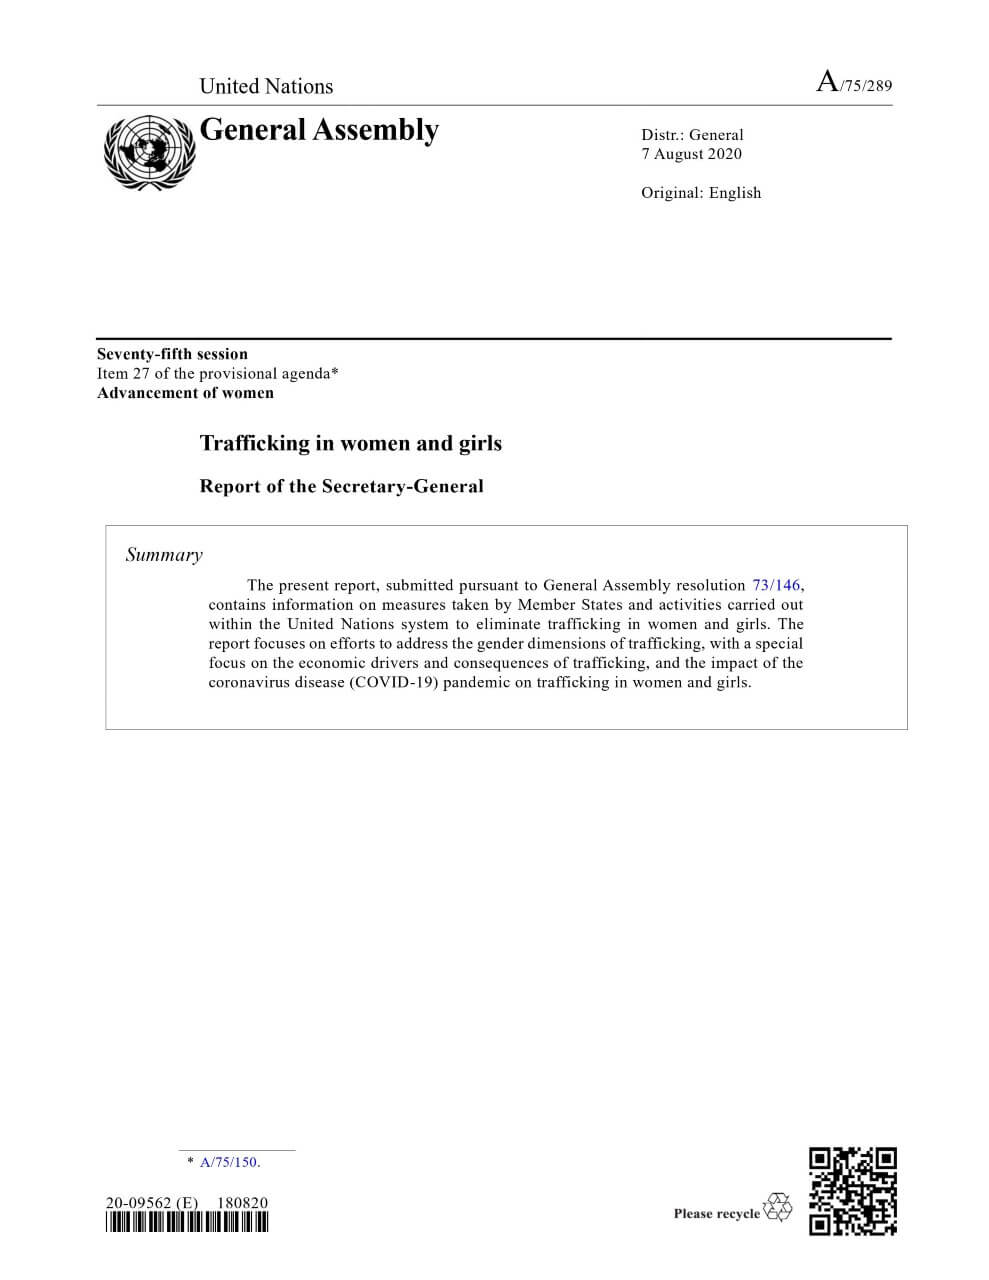 Trafficking in women and girls: Report of the Secretary-General